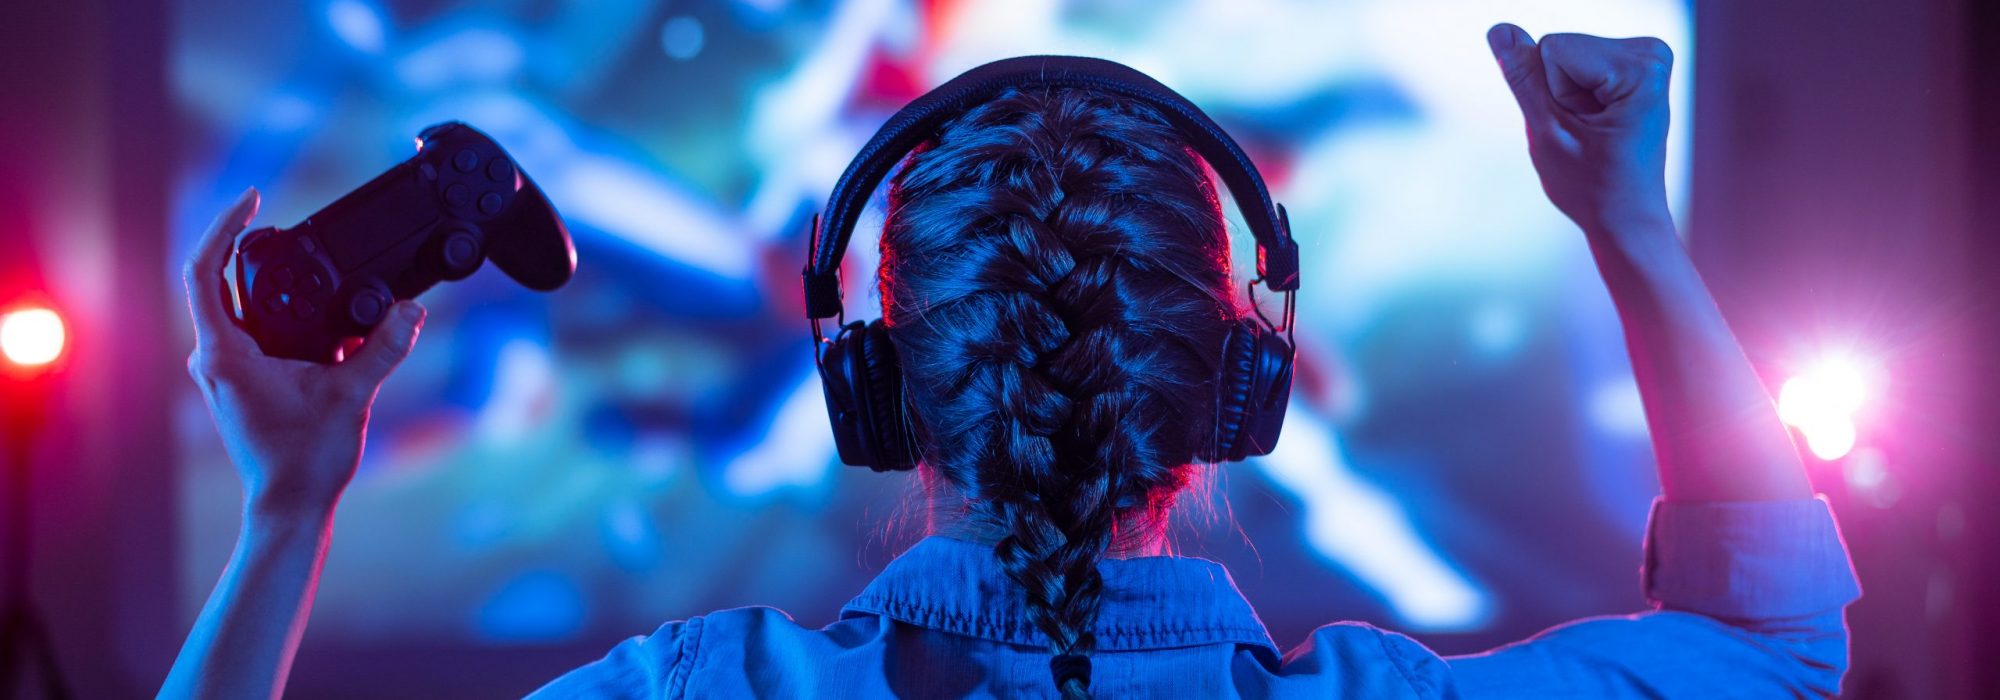 Girl in headphones plays a video game on the big TV screen. Gamer with a joystick. Online gaming with friends, win, prize. Fun entertainment. Teens play adventure games. Back view. Neon lighting